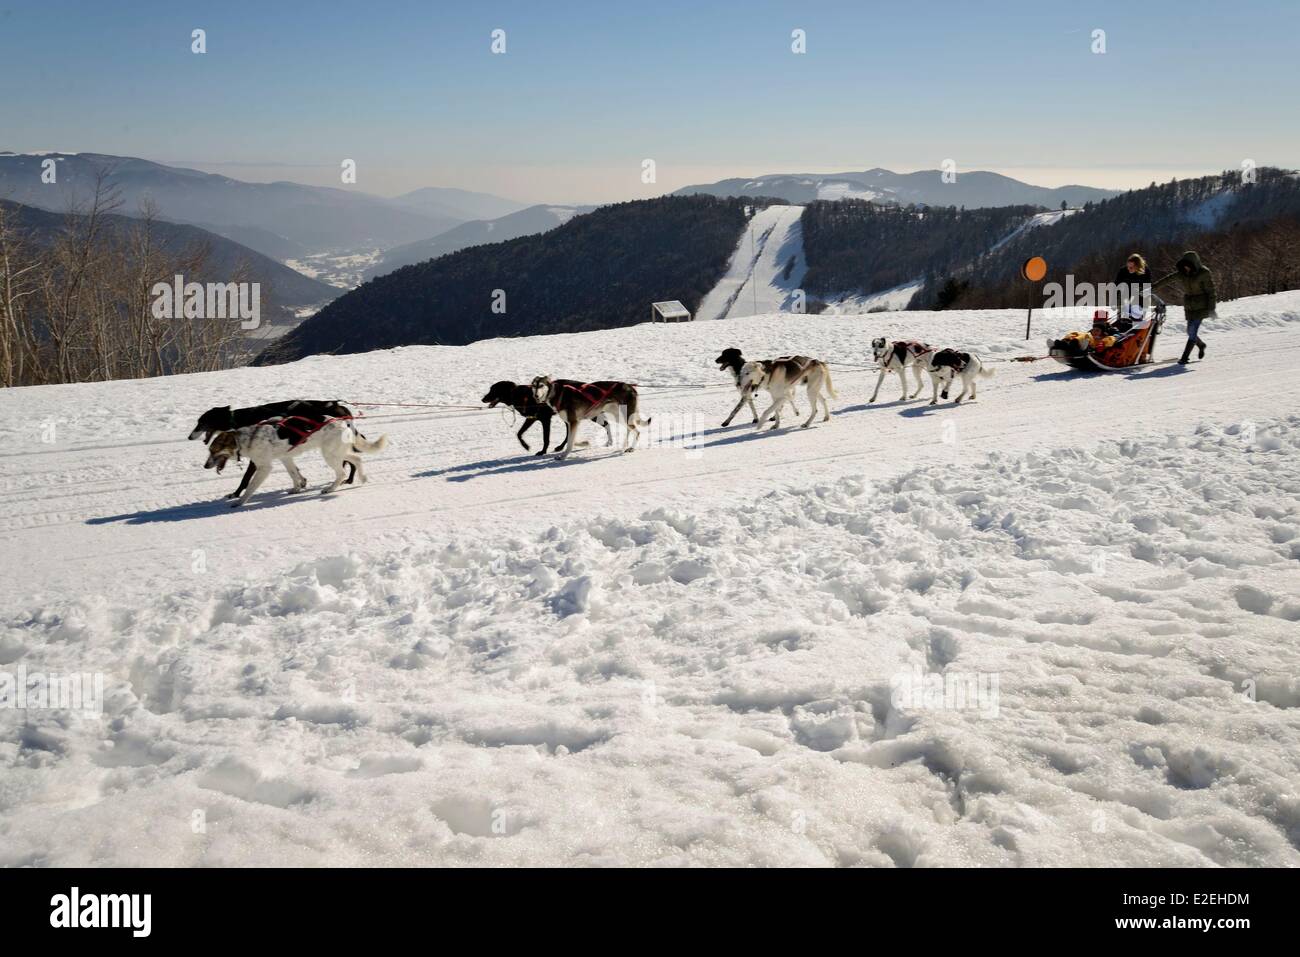 France, Territoire de Belfort, Ballon d'Alsace, top sled and dogs, overlooking the Doller valley Stock Photo